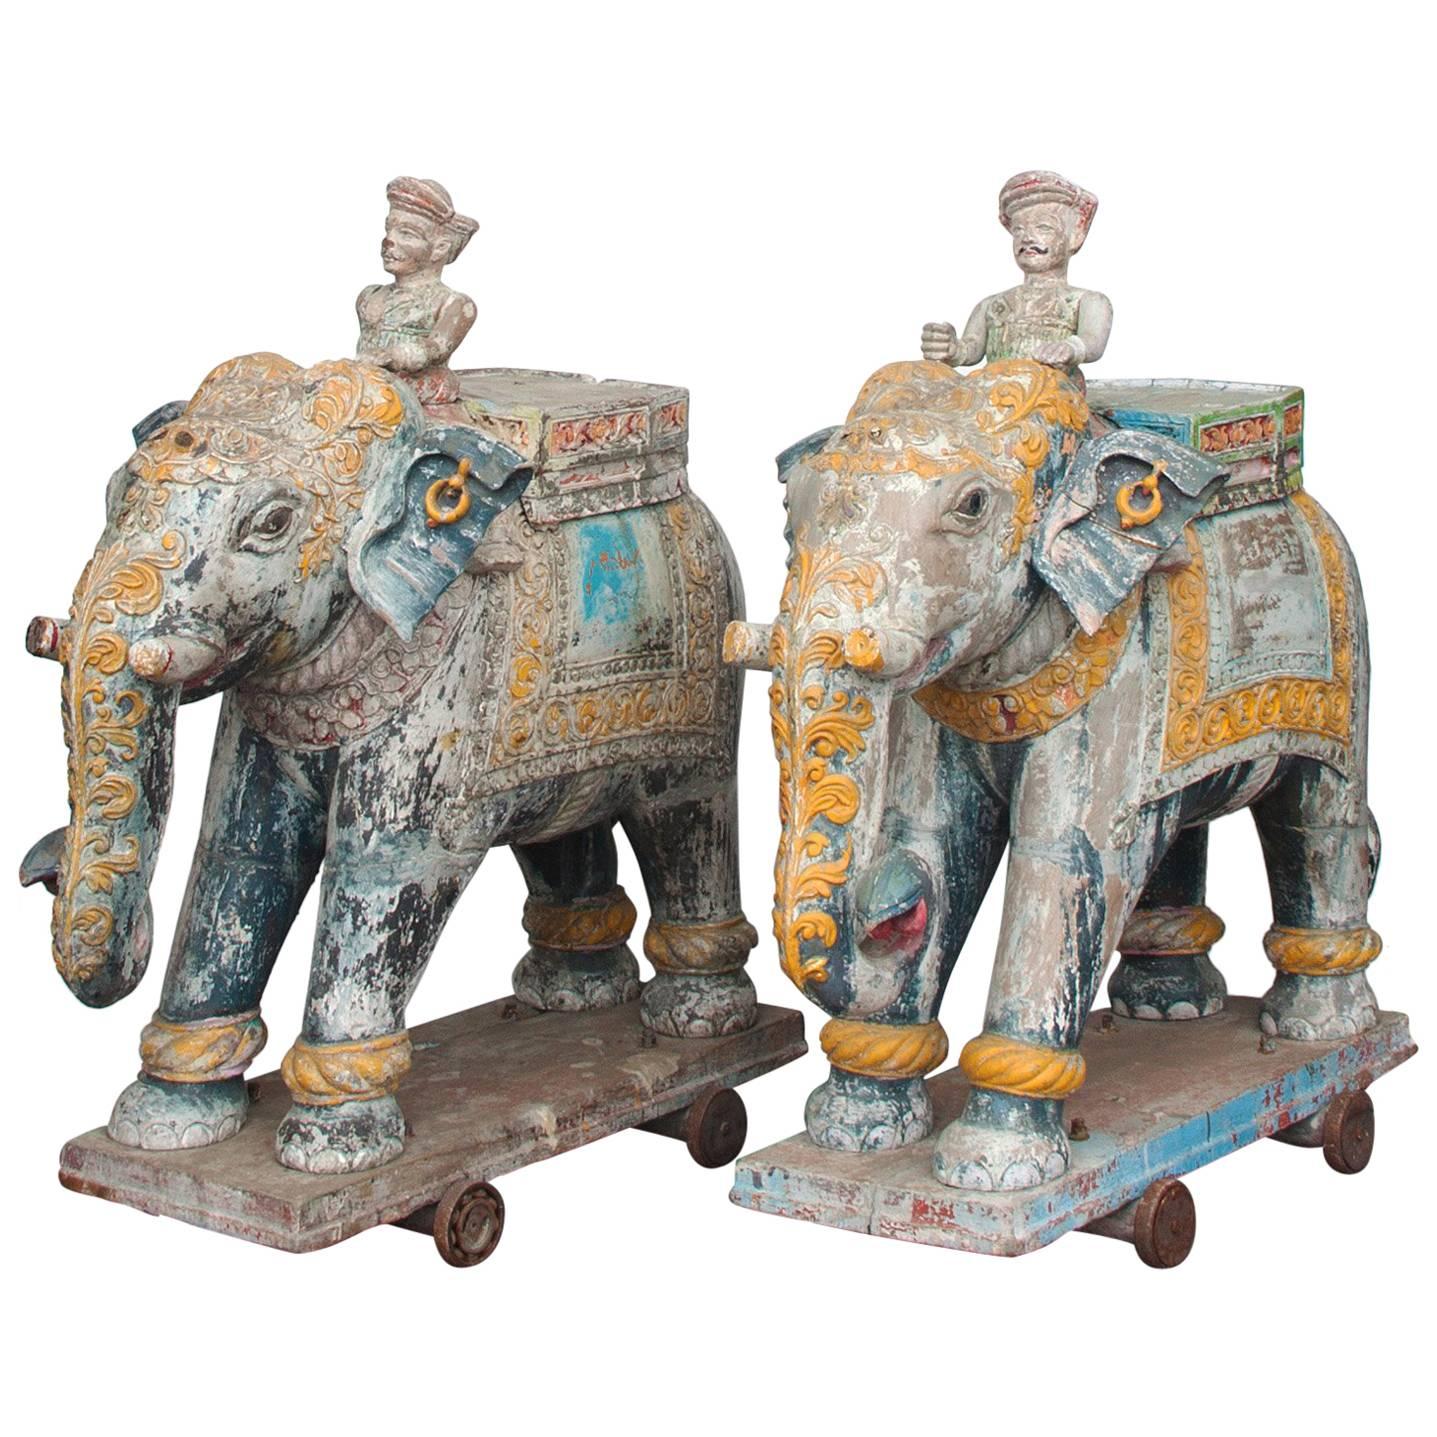 Set of Two Wooden Painted 19th Century Elephants, India